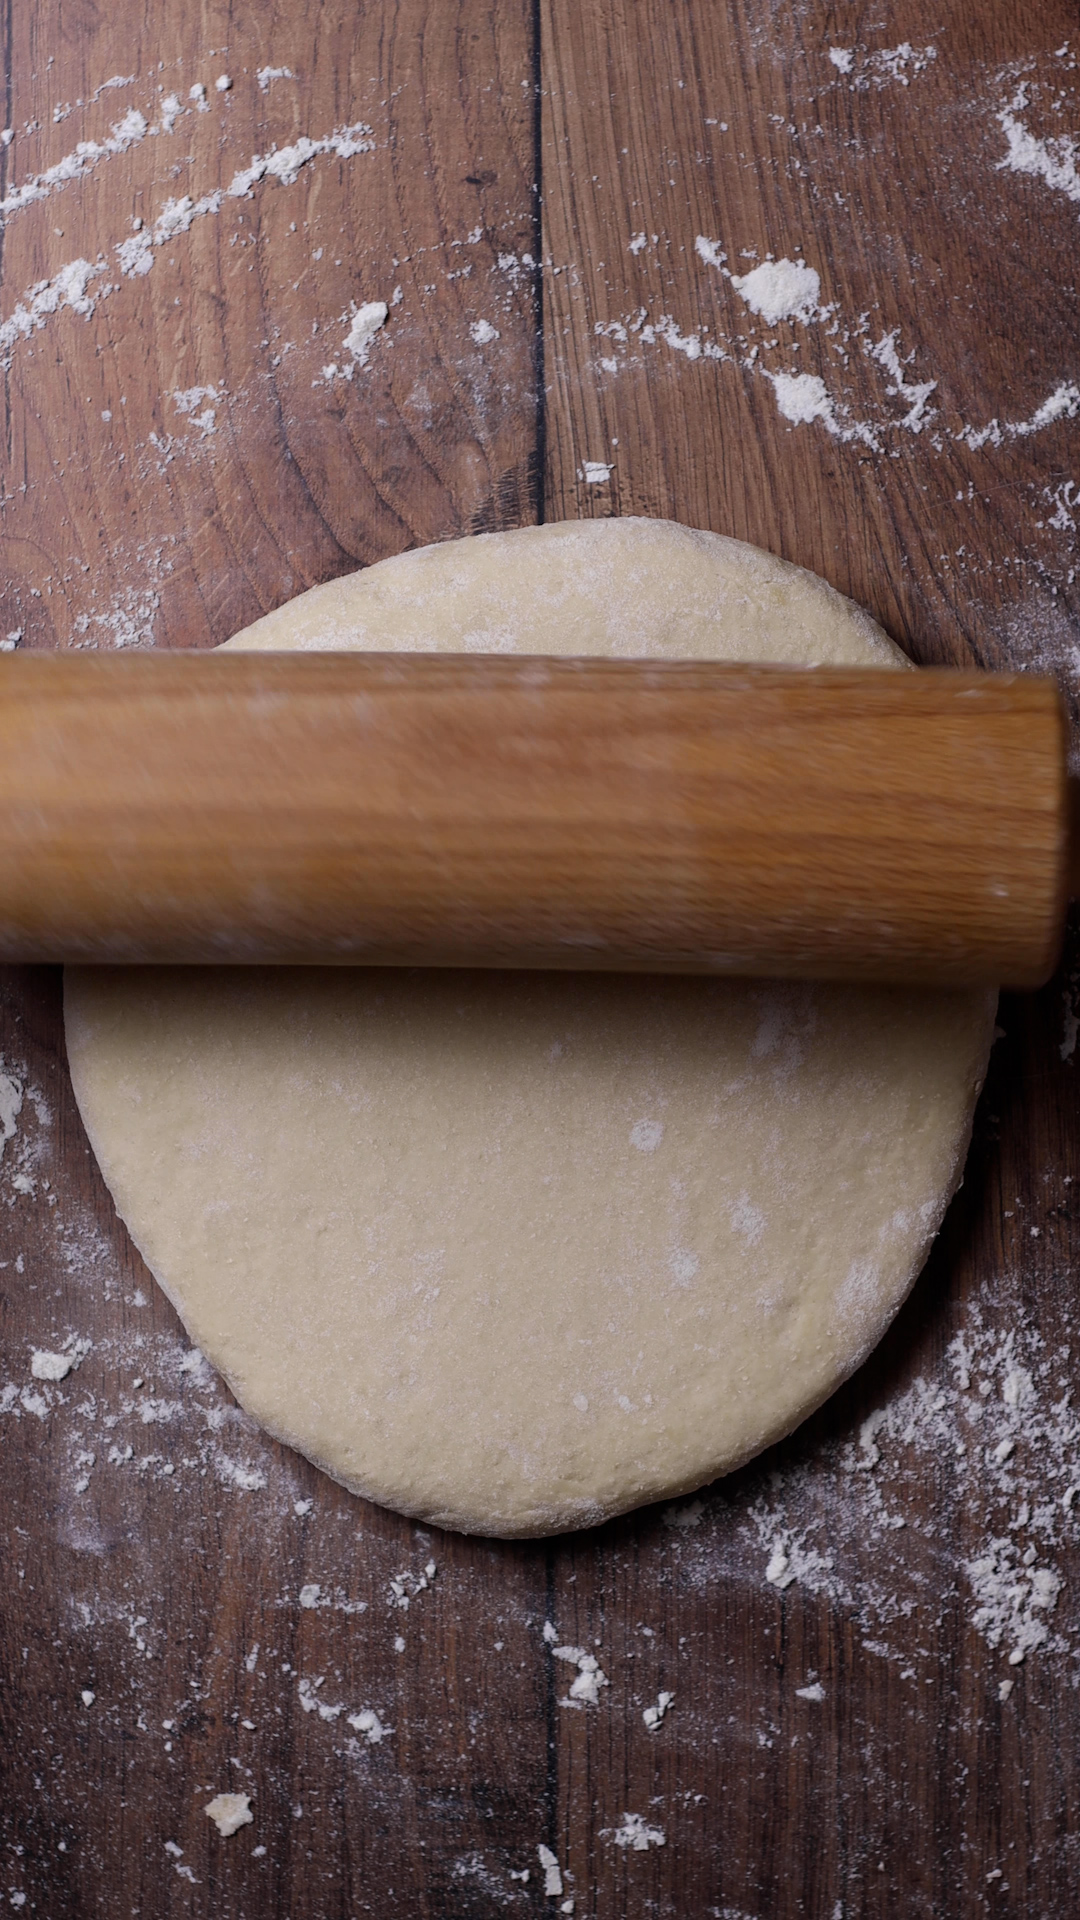 A wooden rolling pin  unolling the dough on a wooden surface